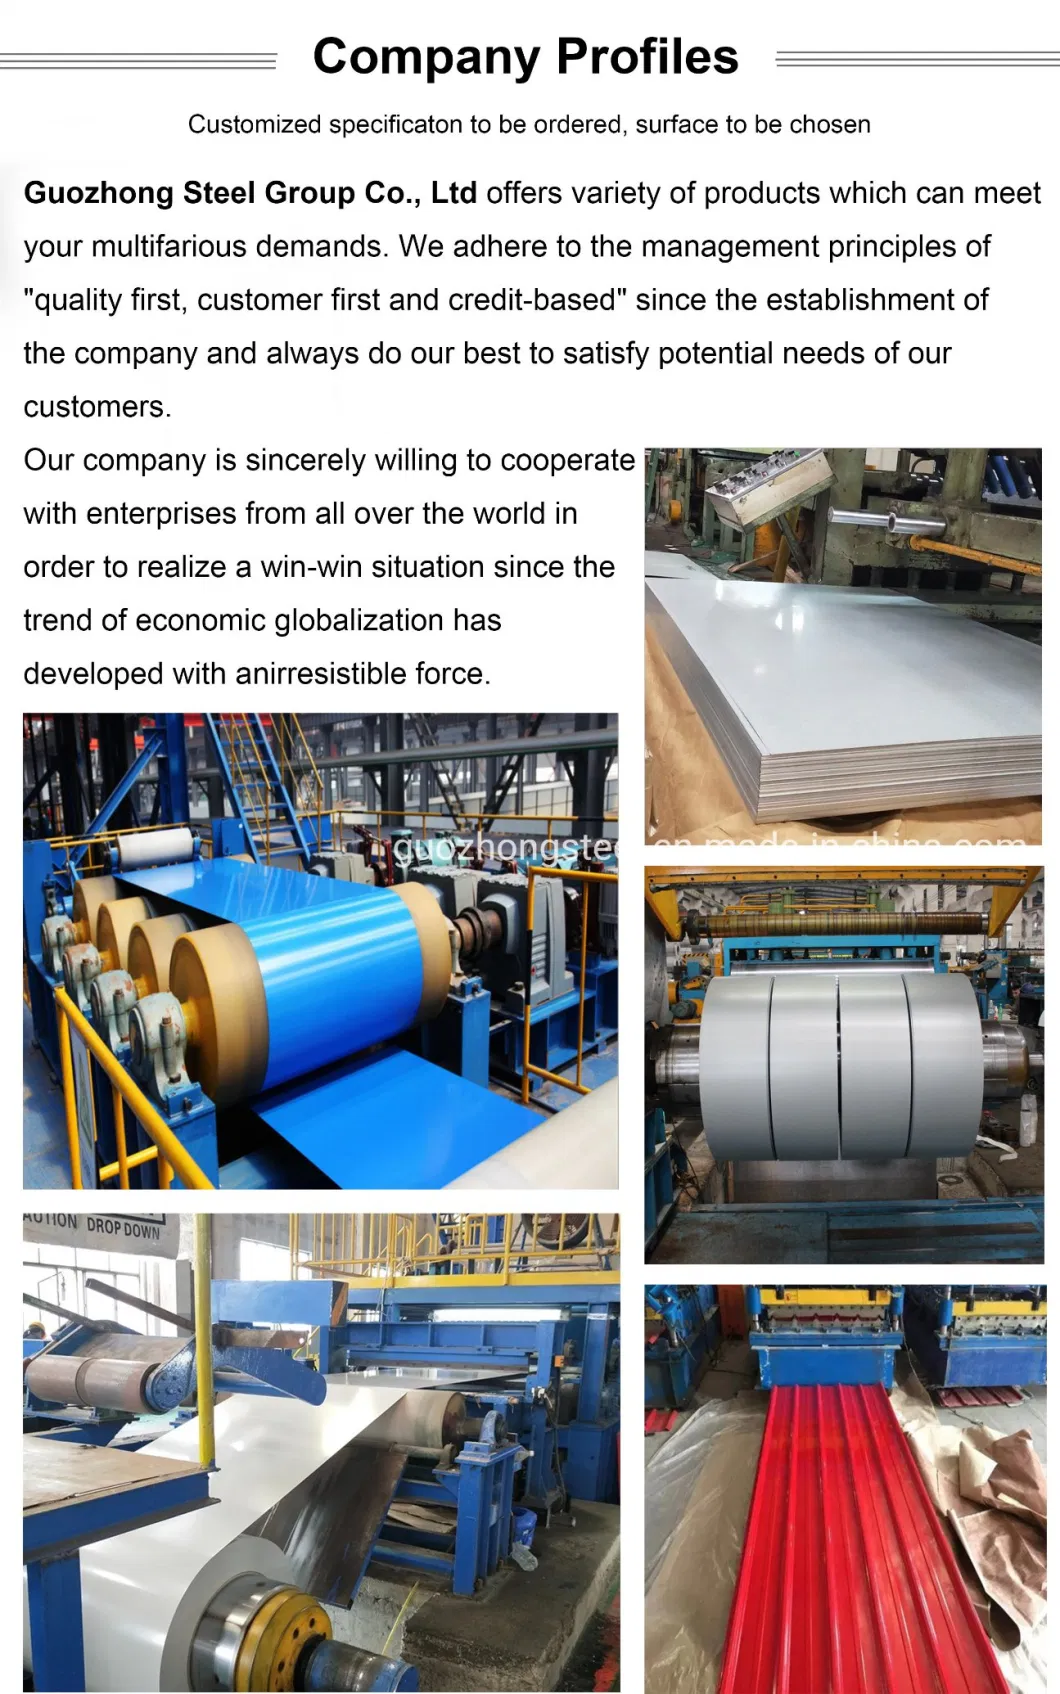 Chinese Steel Sells Dx53D Galvanized Rolls /Gi Coils